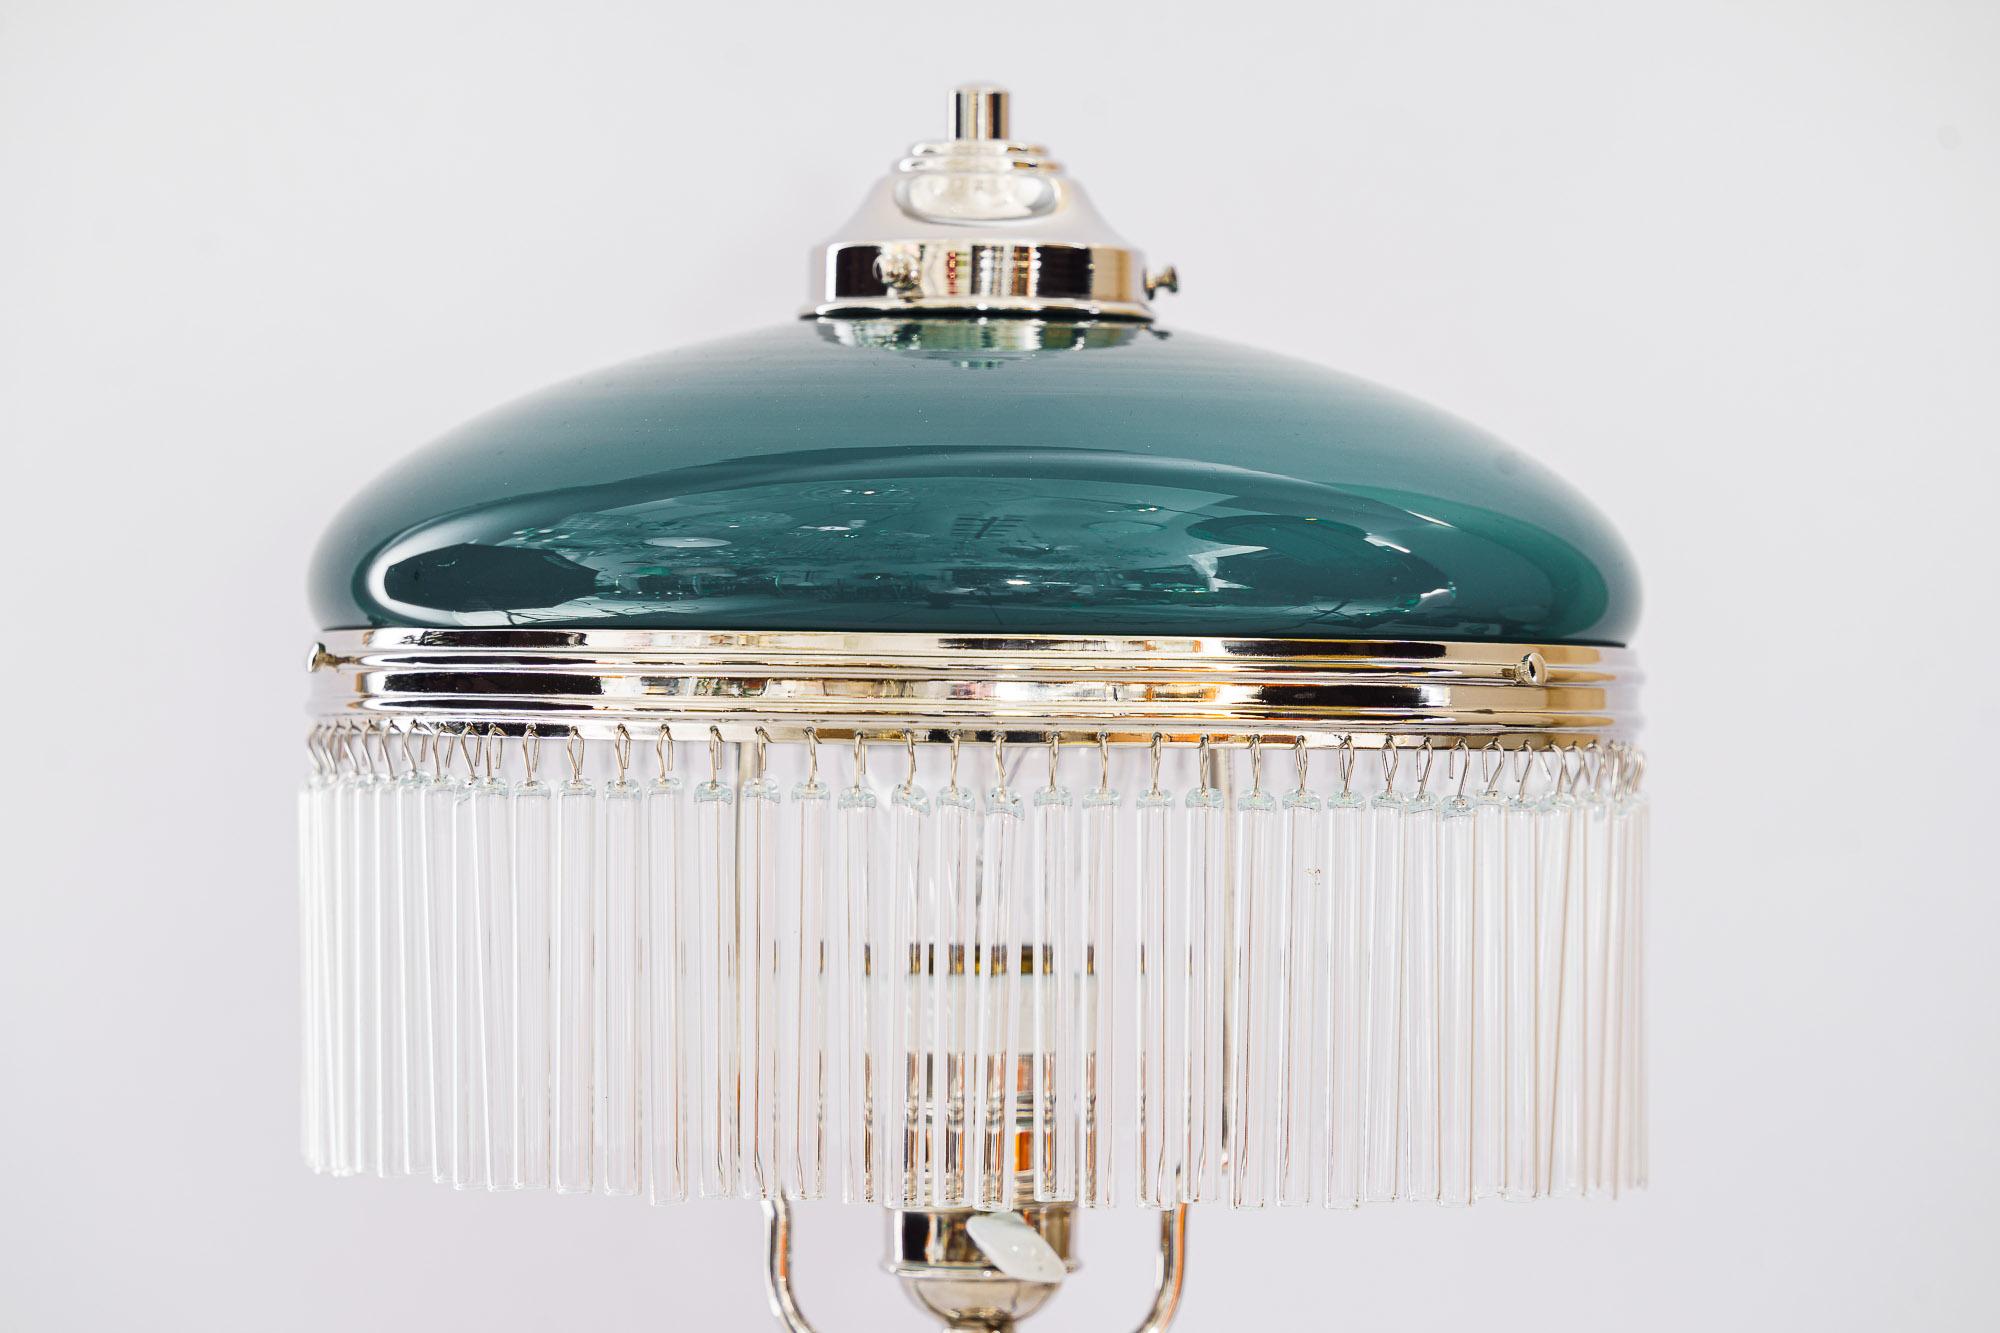 Art Deco nickel - plated table lamp vienna around 1920s.
The glass sticks are replaced (new).